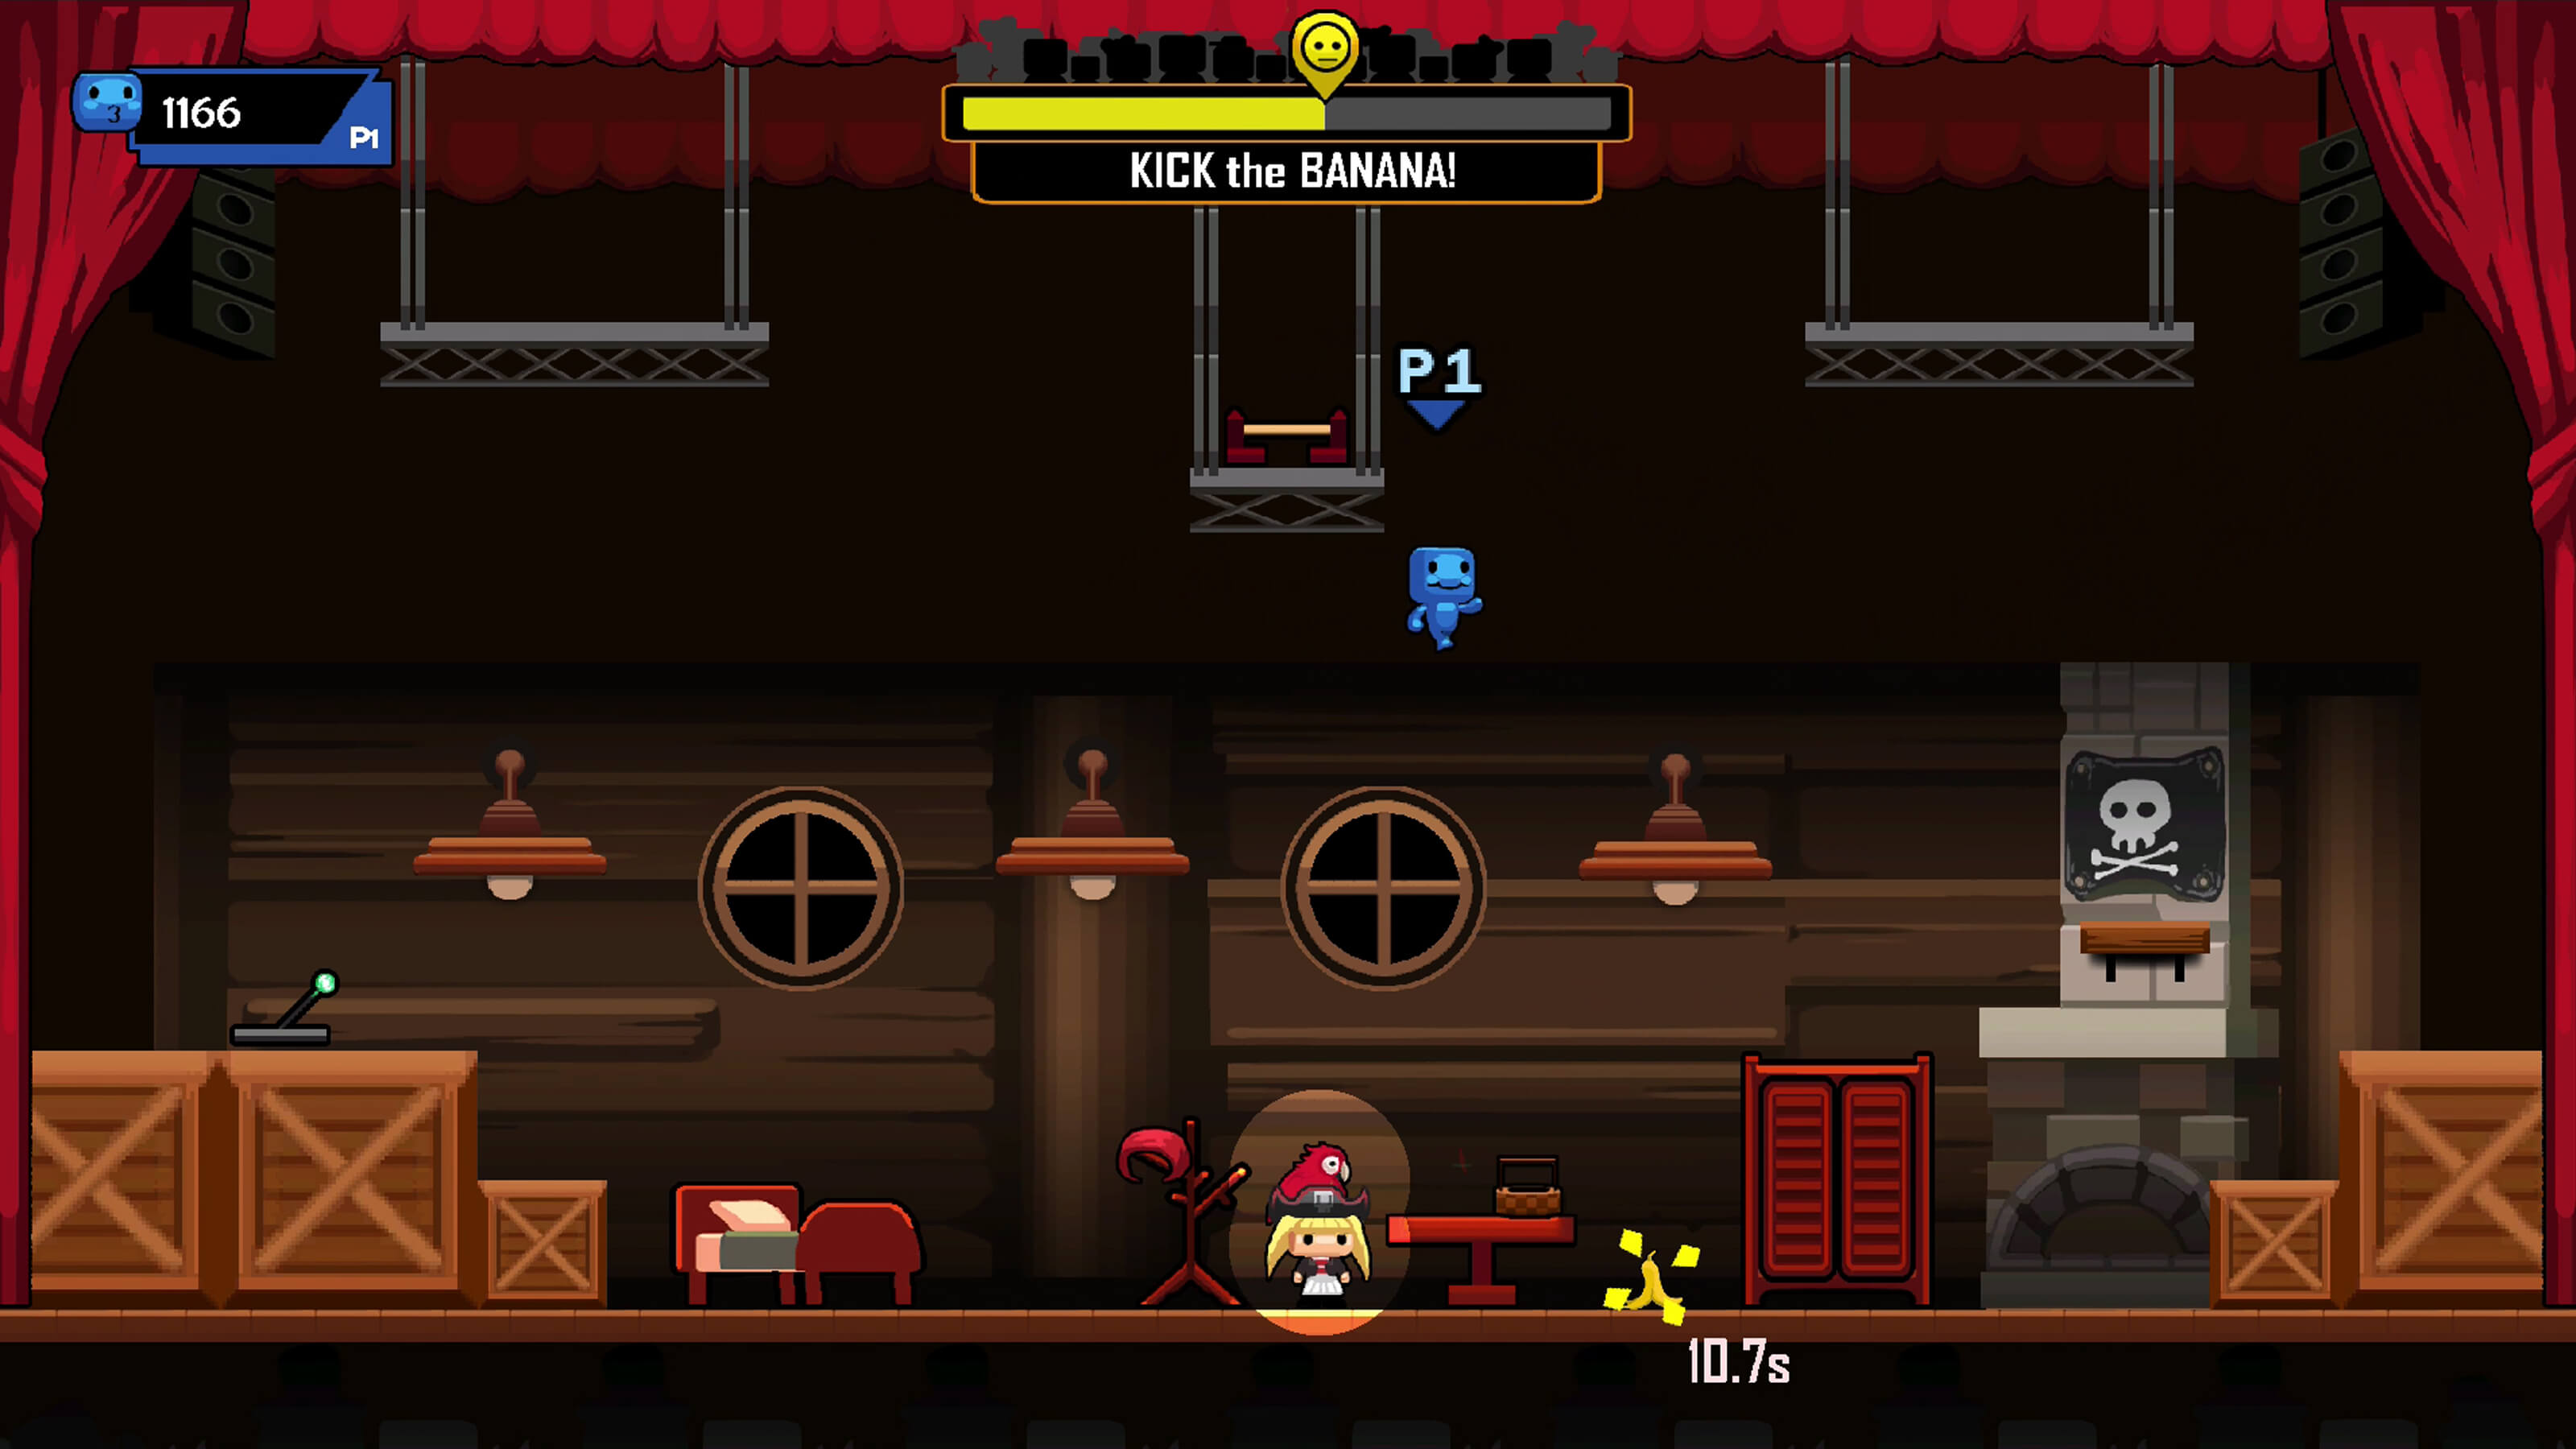 A player's character dressed in a pirate costume with a parrot on her head stands on stage under a spotlight